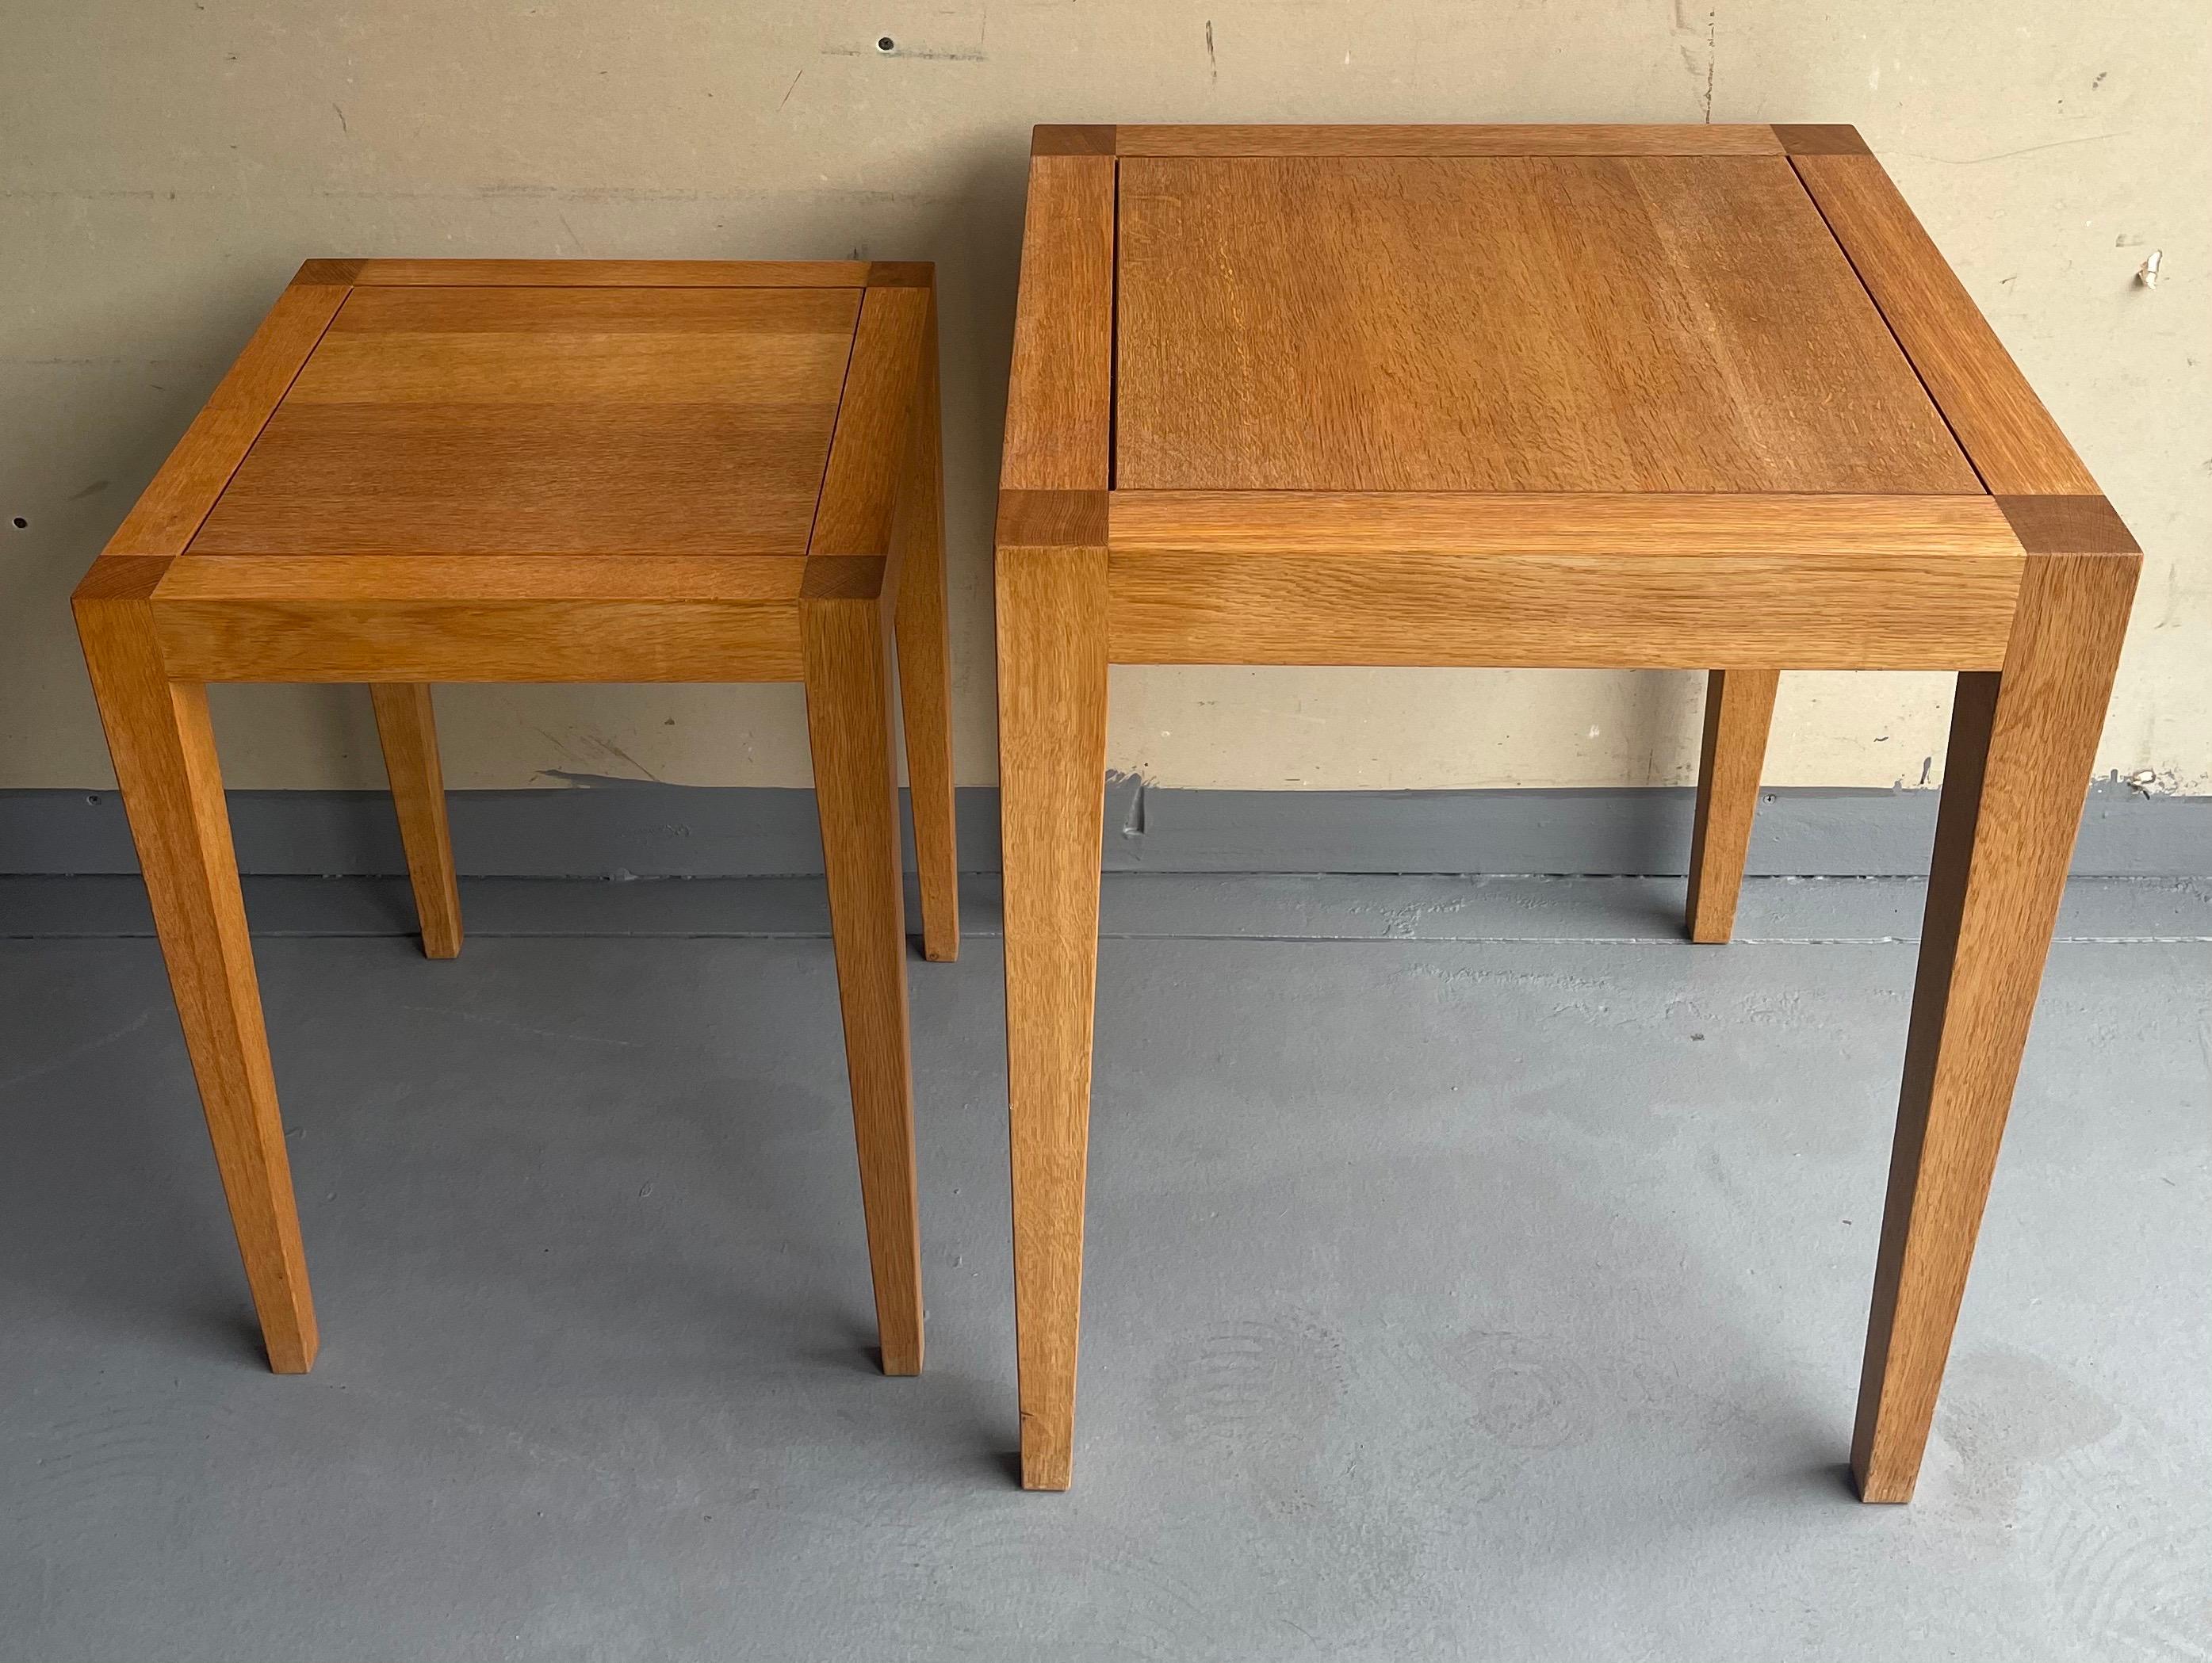 Pair of Organic Modern Square Nesting Tables by Gunther Lambert In Good Condition For Sale In San Diego, CA